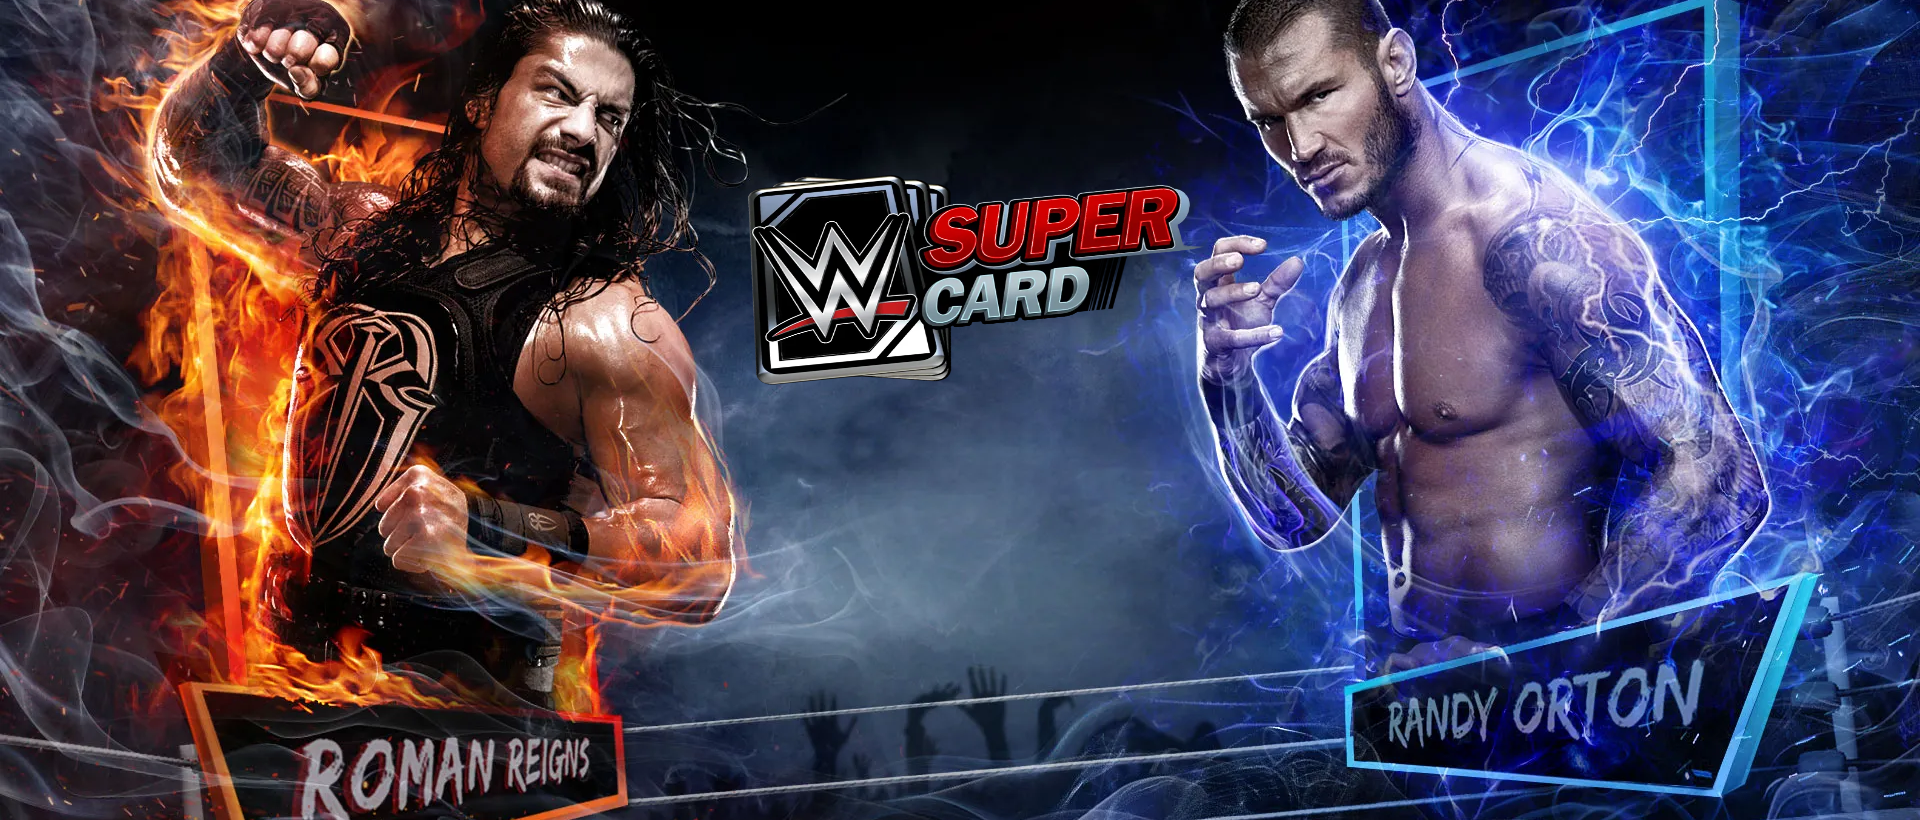 Download & Play WWE SuperCard – Multiplayer Card Battle Game on PC & Mac with NoxPlayer (Emulator)